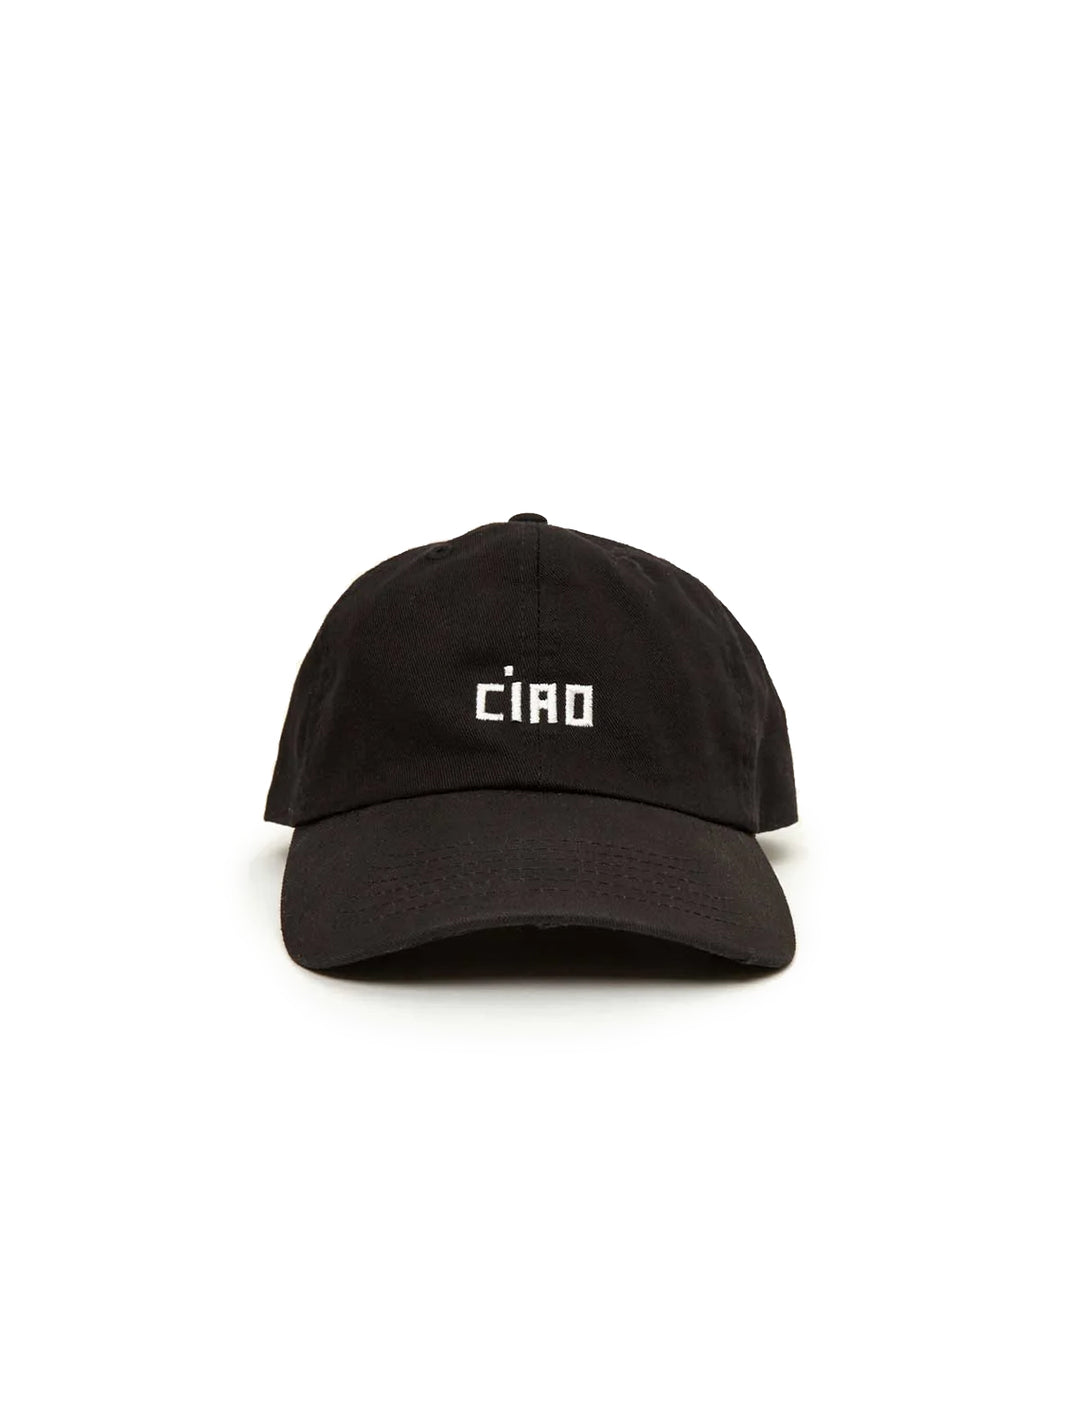 Front view of Clare V.'s ciao baseball hat in black and white.